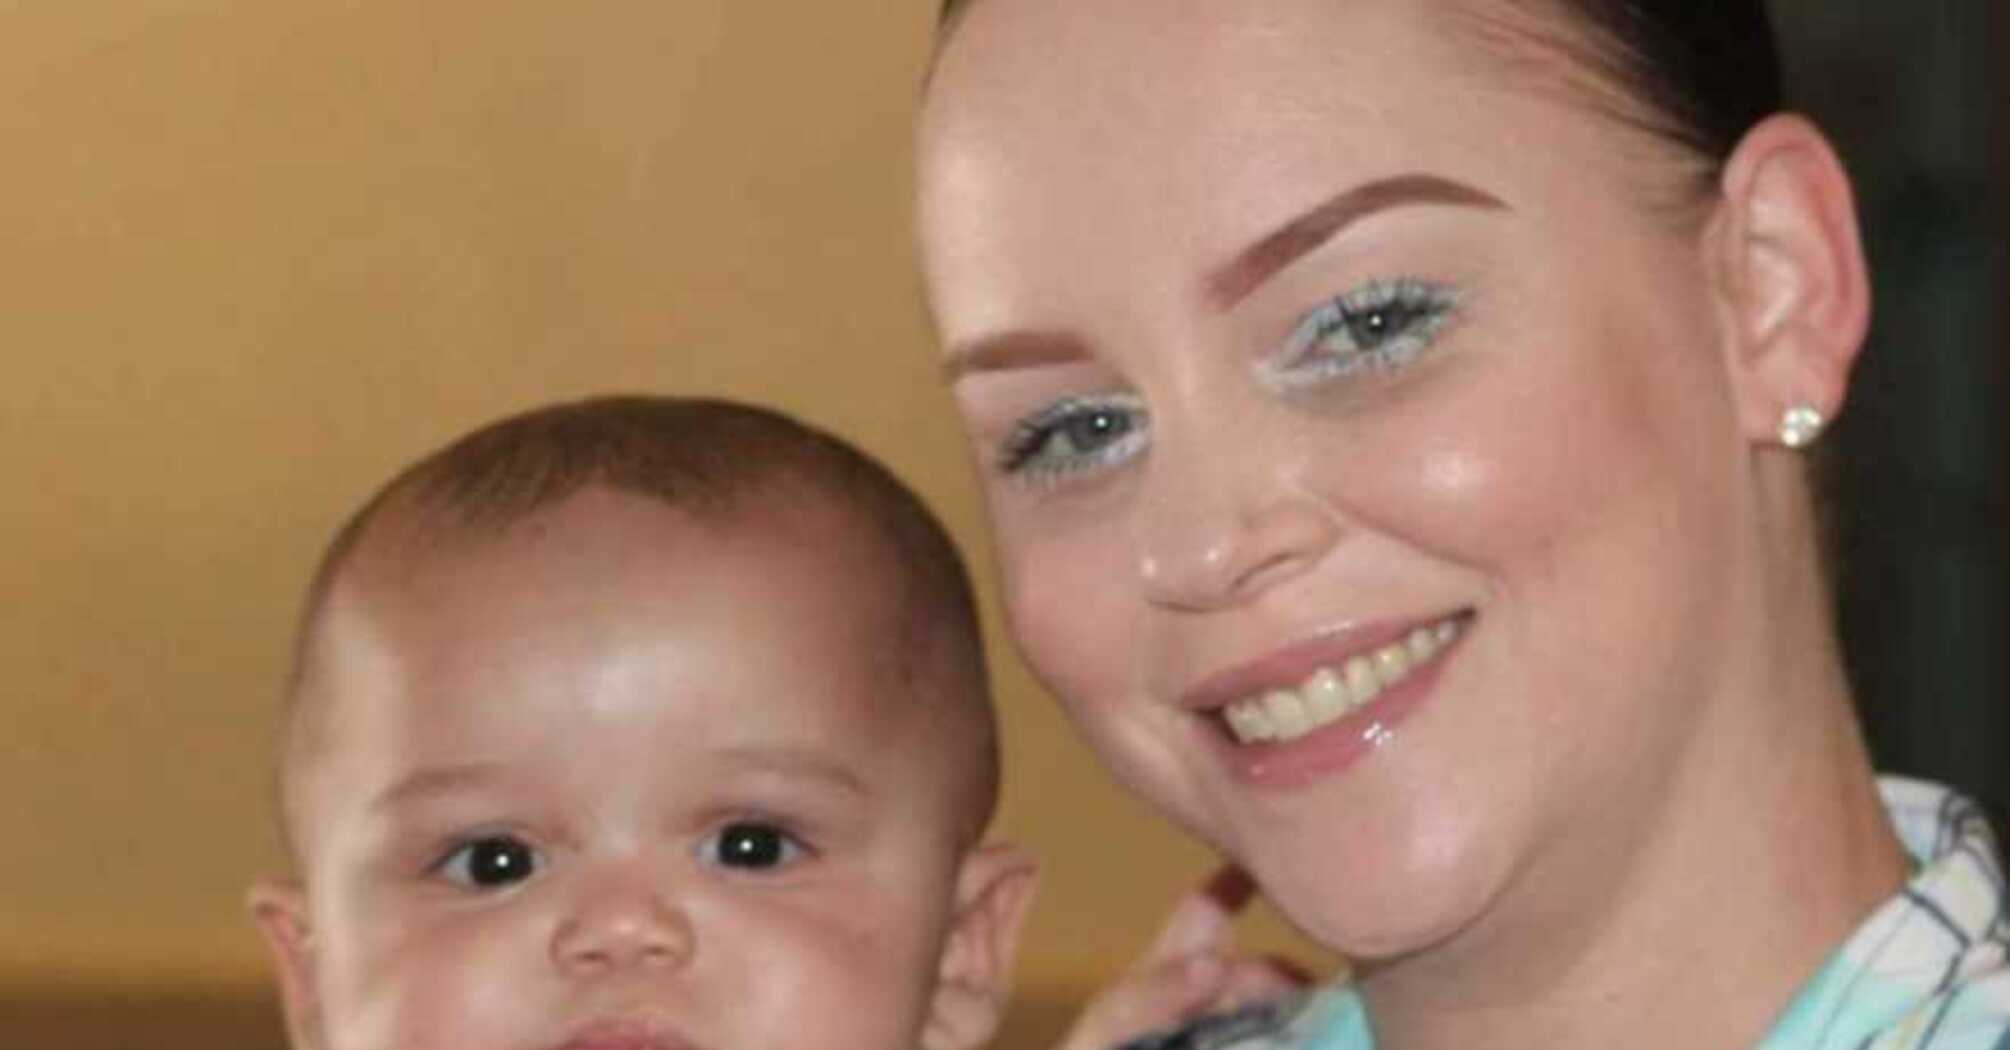 The most productive surrogate mother accidentally gave away her own child